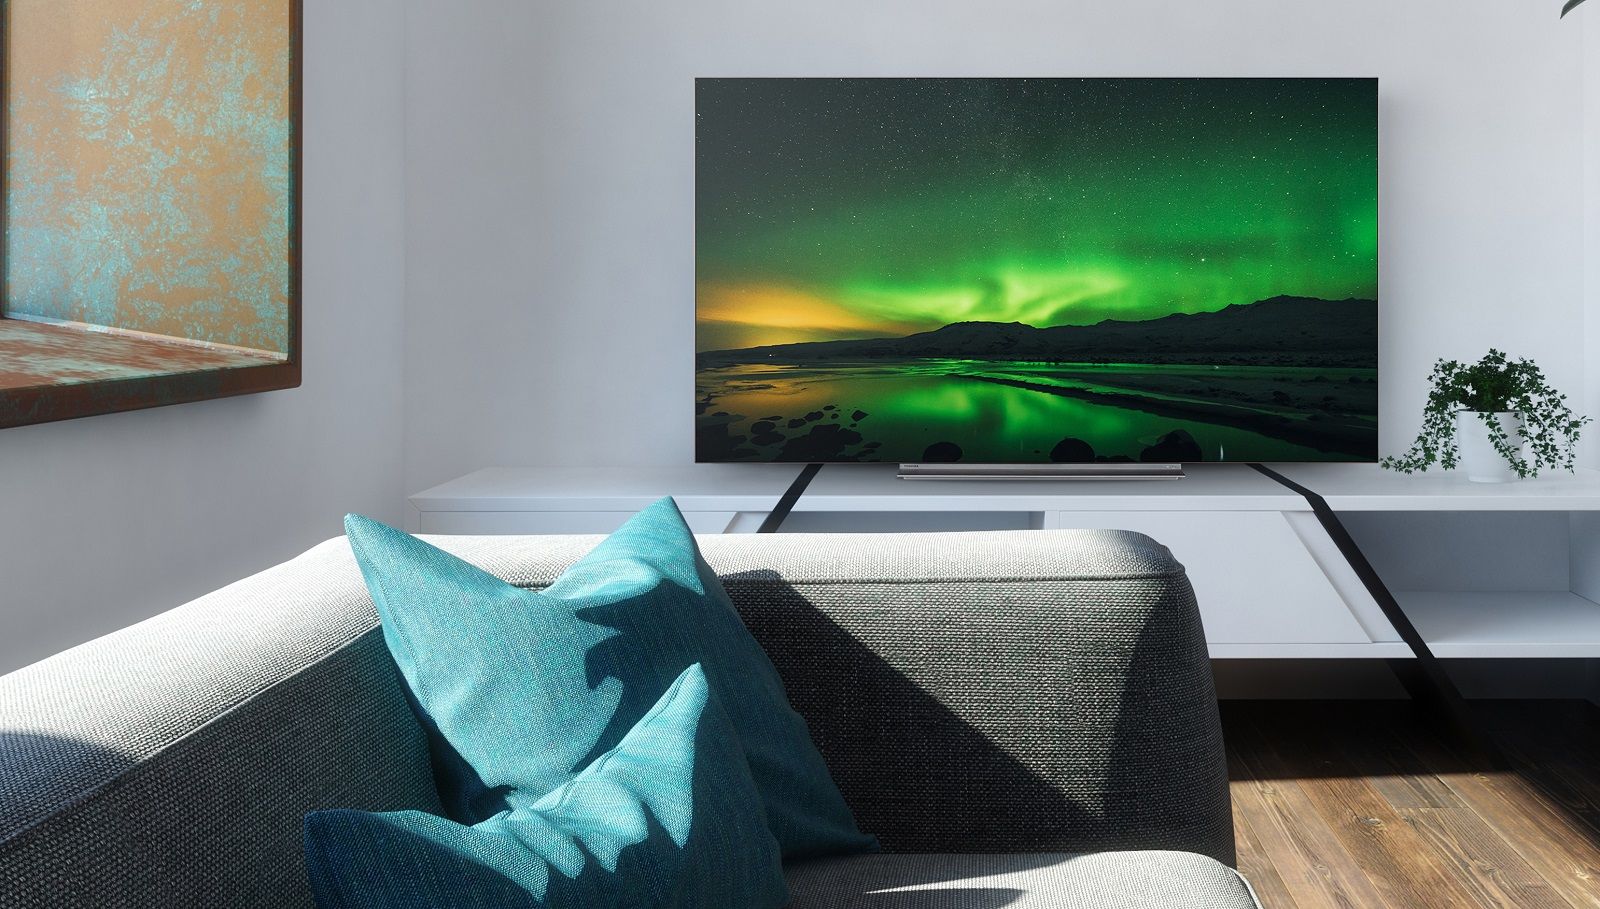 toshiba tvs return to europe with 65 inch x97 oled leading the charge image 1